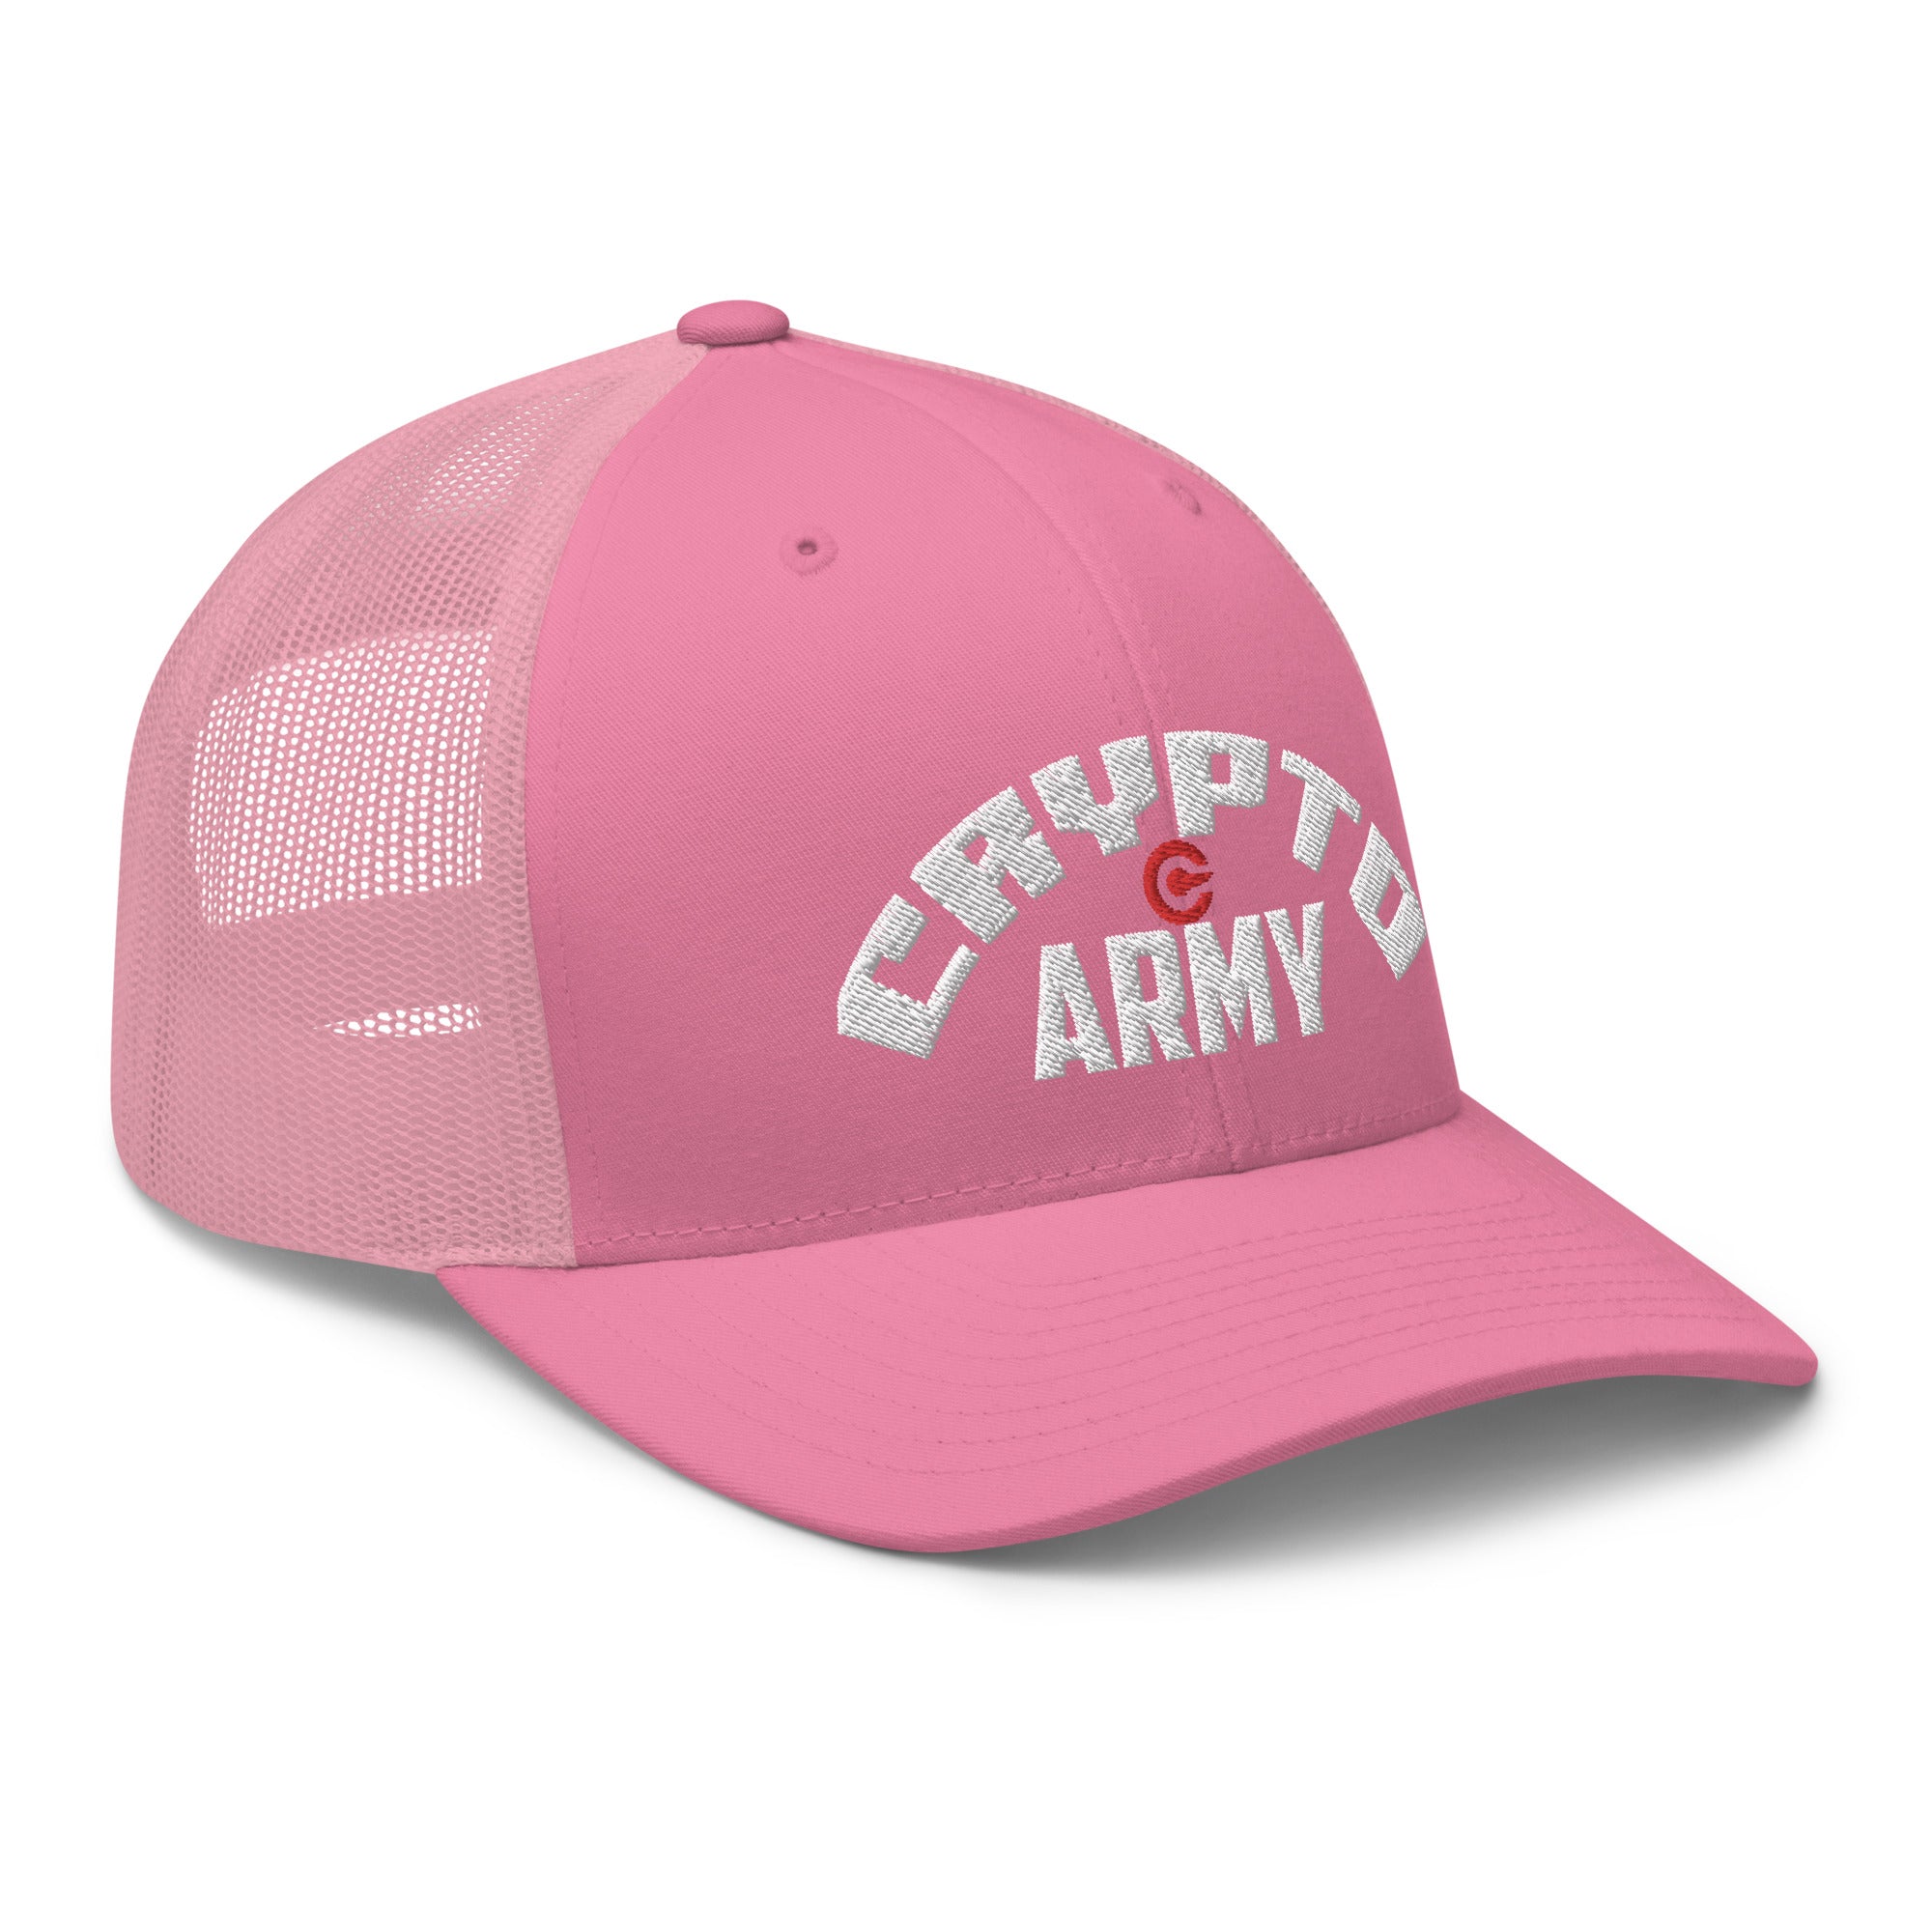 Crypto Army Curved Cryptocurrency Symbol Trucker Cap Snapback Hat